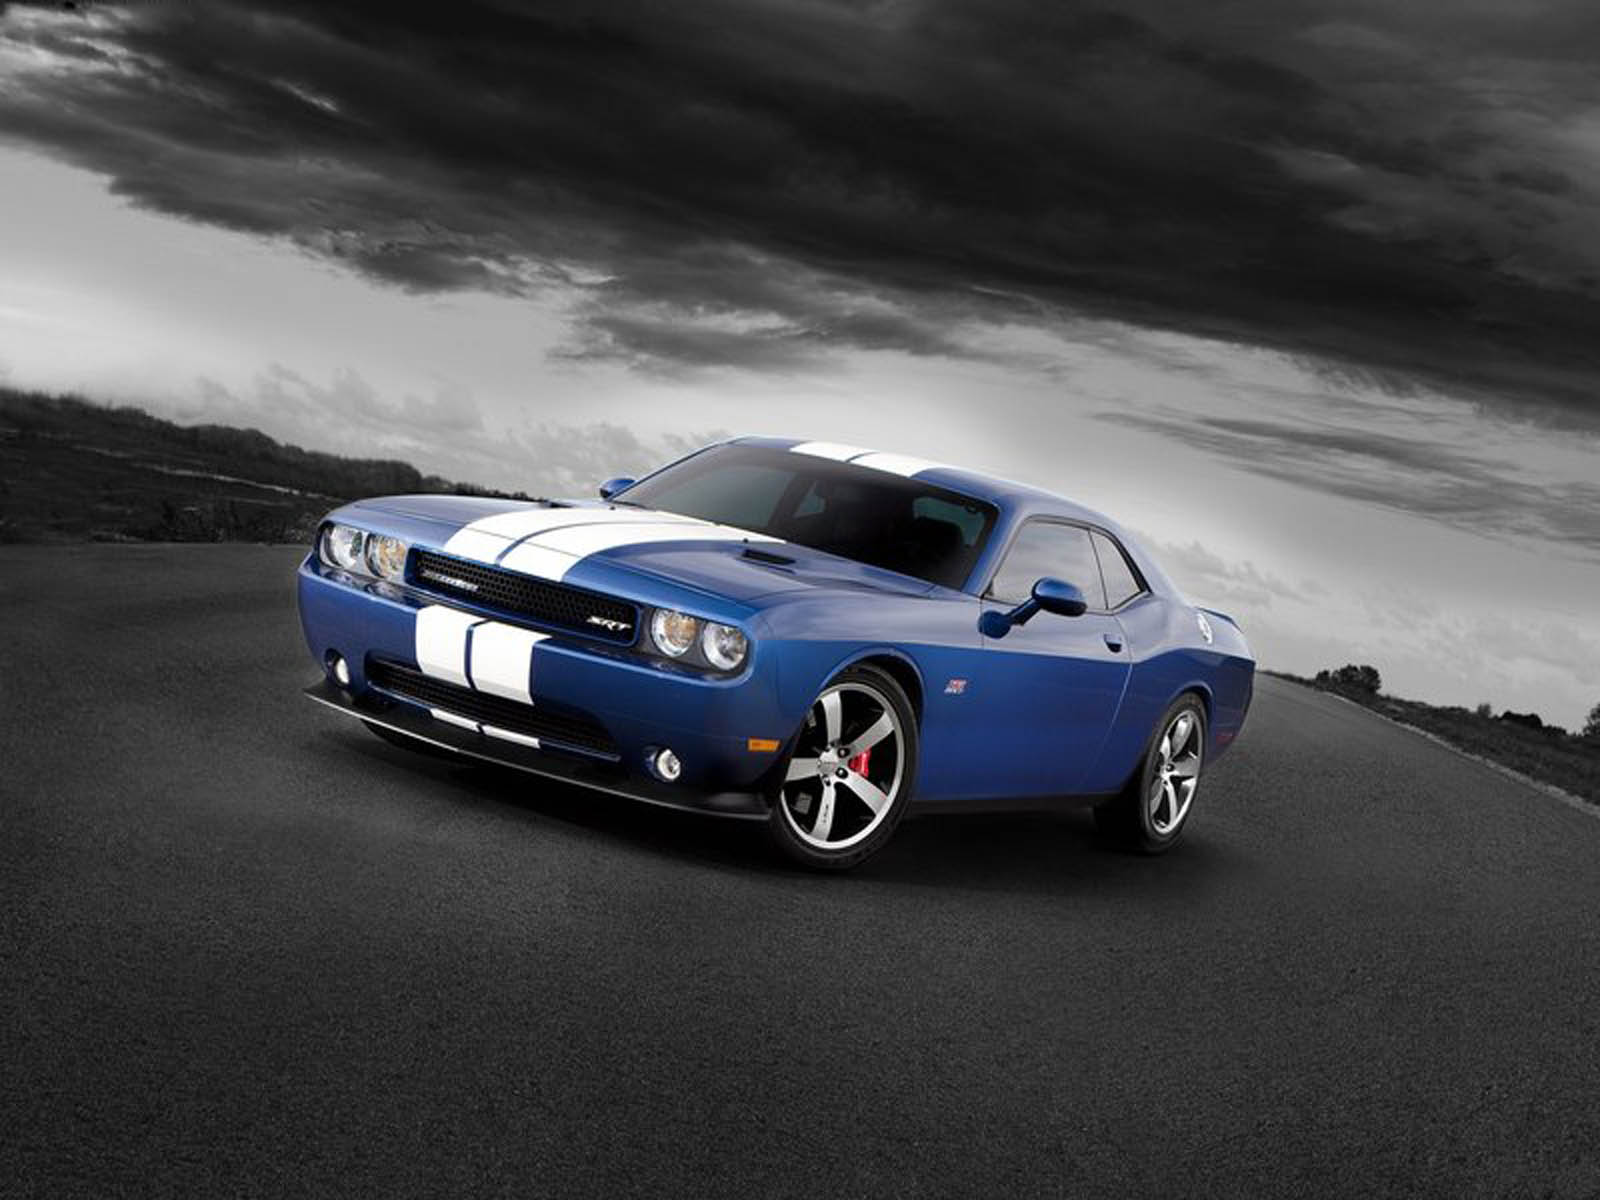 Tag Dodge Challenger Srt8 Car Wallpaper Image Paos Pictures And